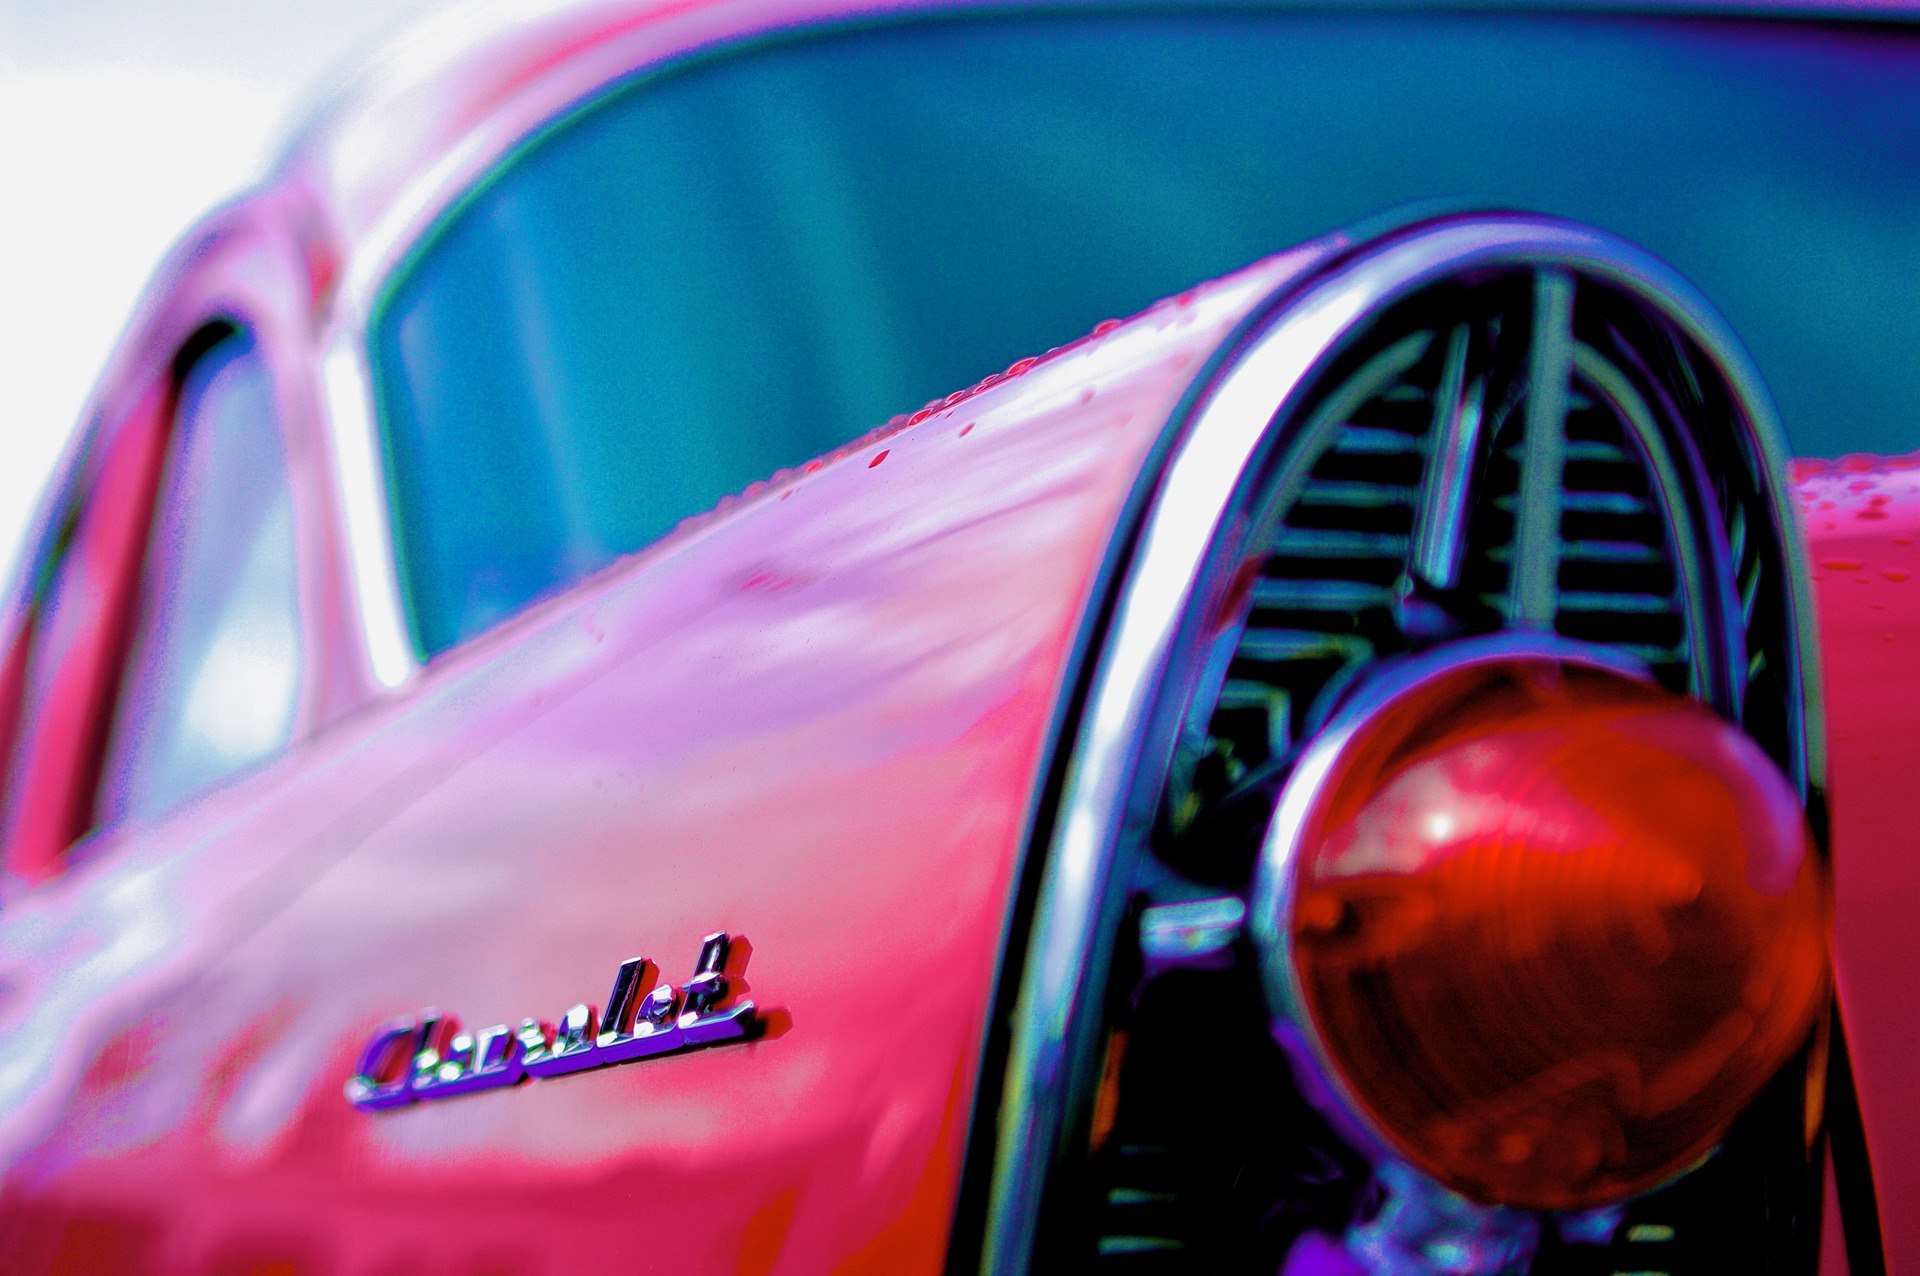 pink car for a blog about driving brand awareness through analyst engagement